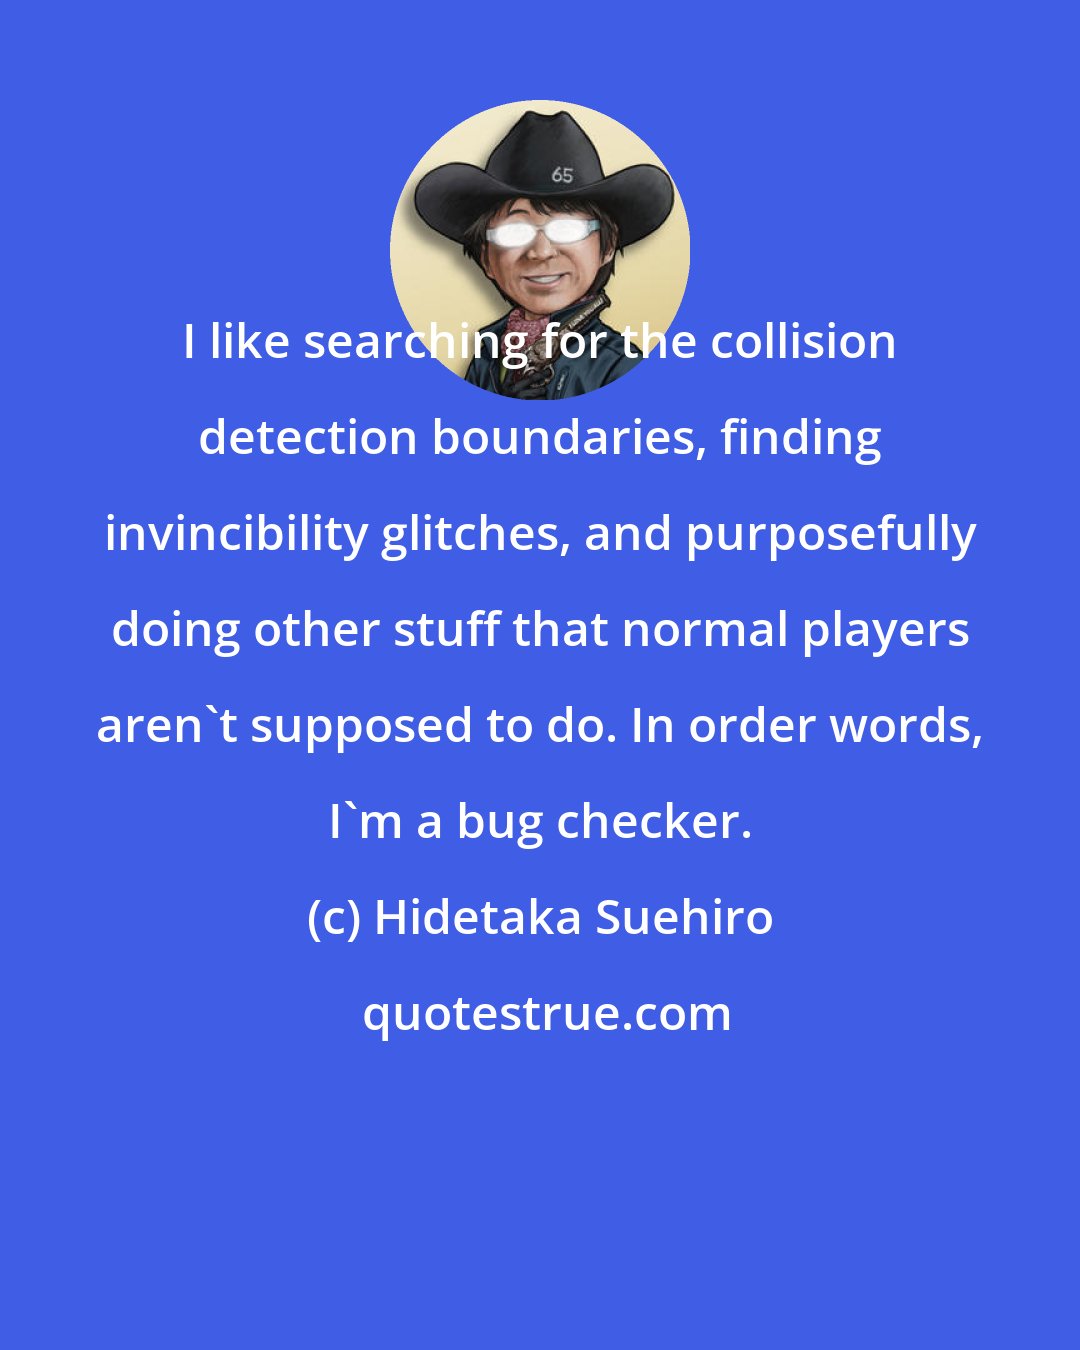 Hidetaka Suehiro: I like searching for the collision detection boundaries, finding invincibility glitches, and purposefully doing other stuff that normal players aren't supposed to do. In order words, I'm a bug checker.